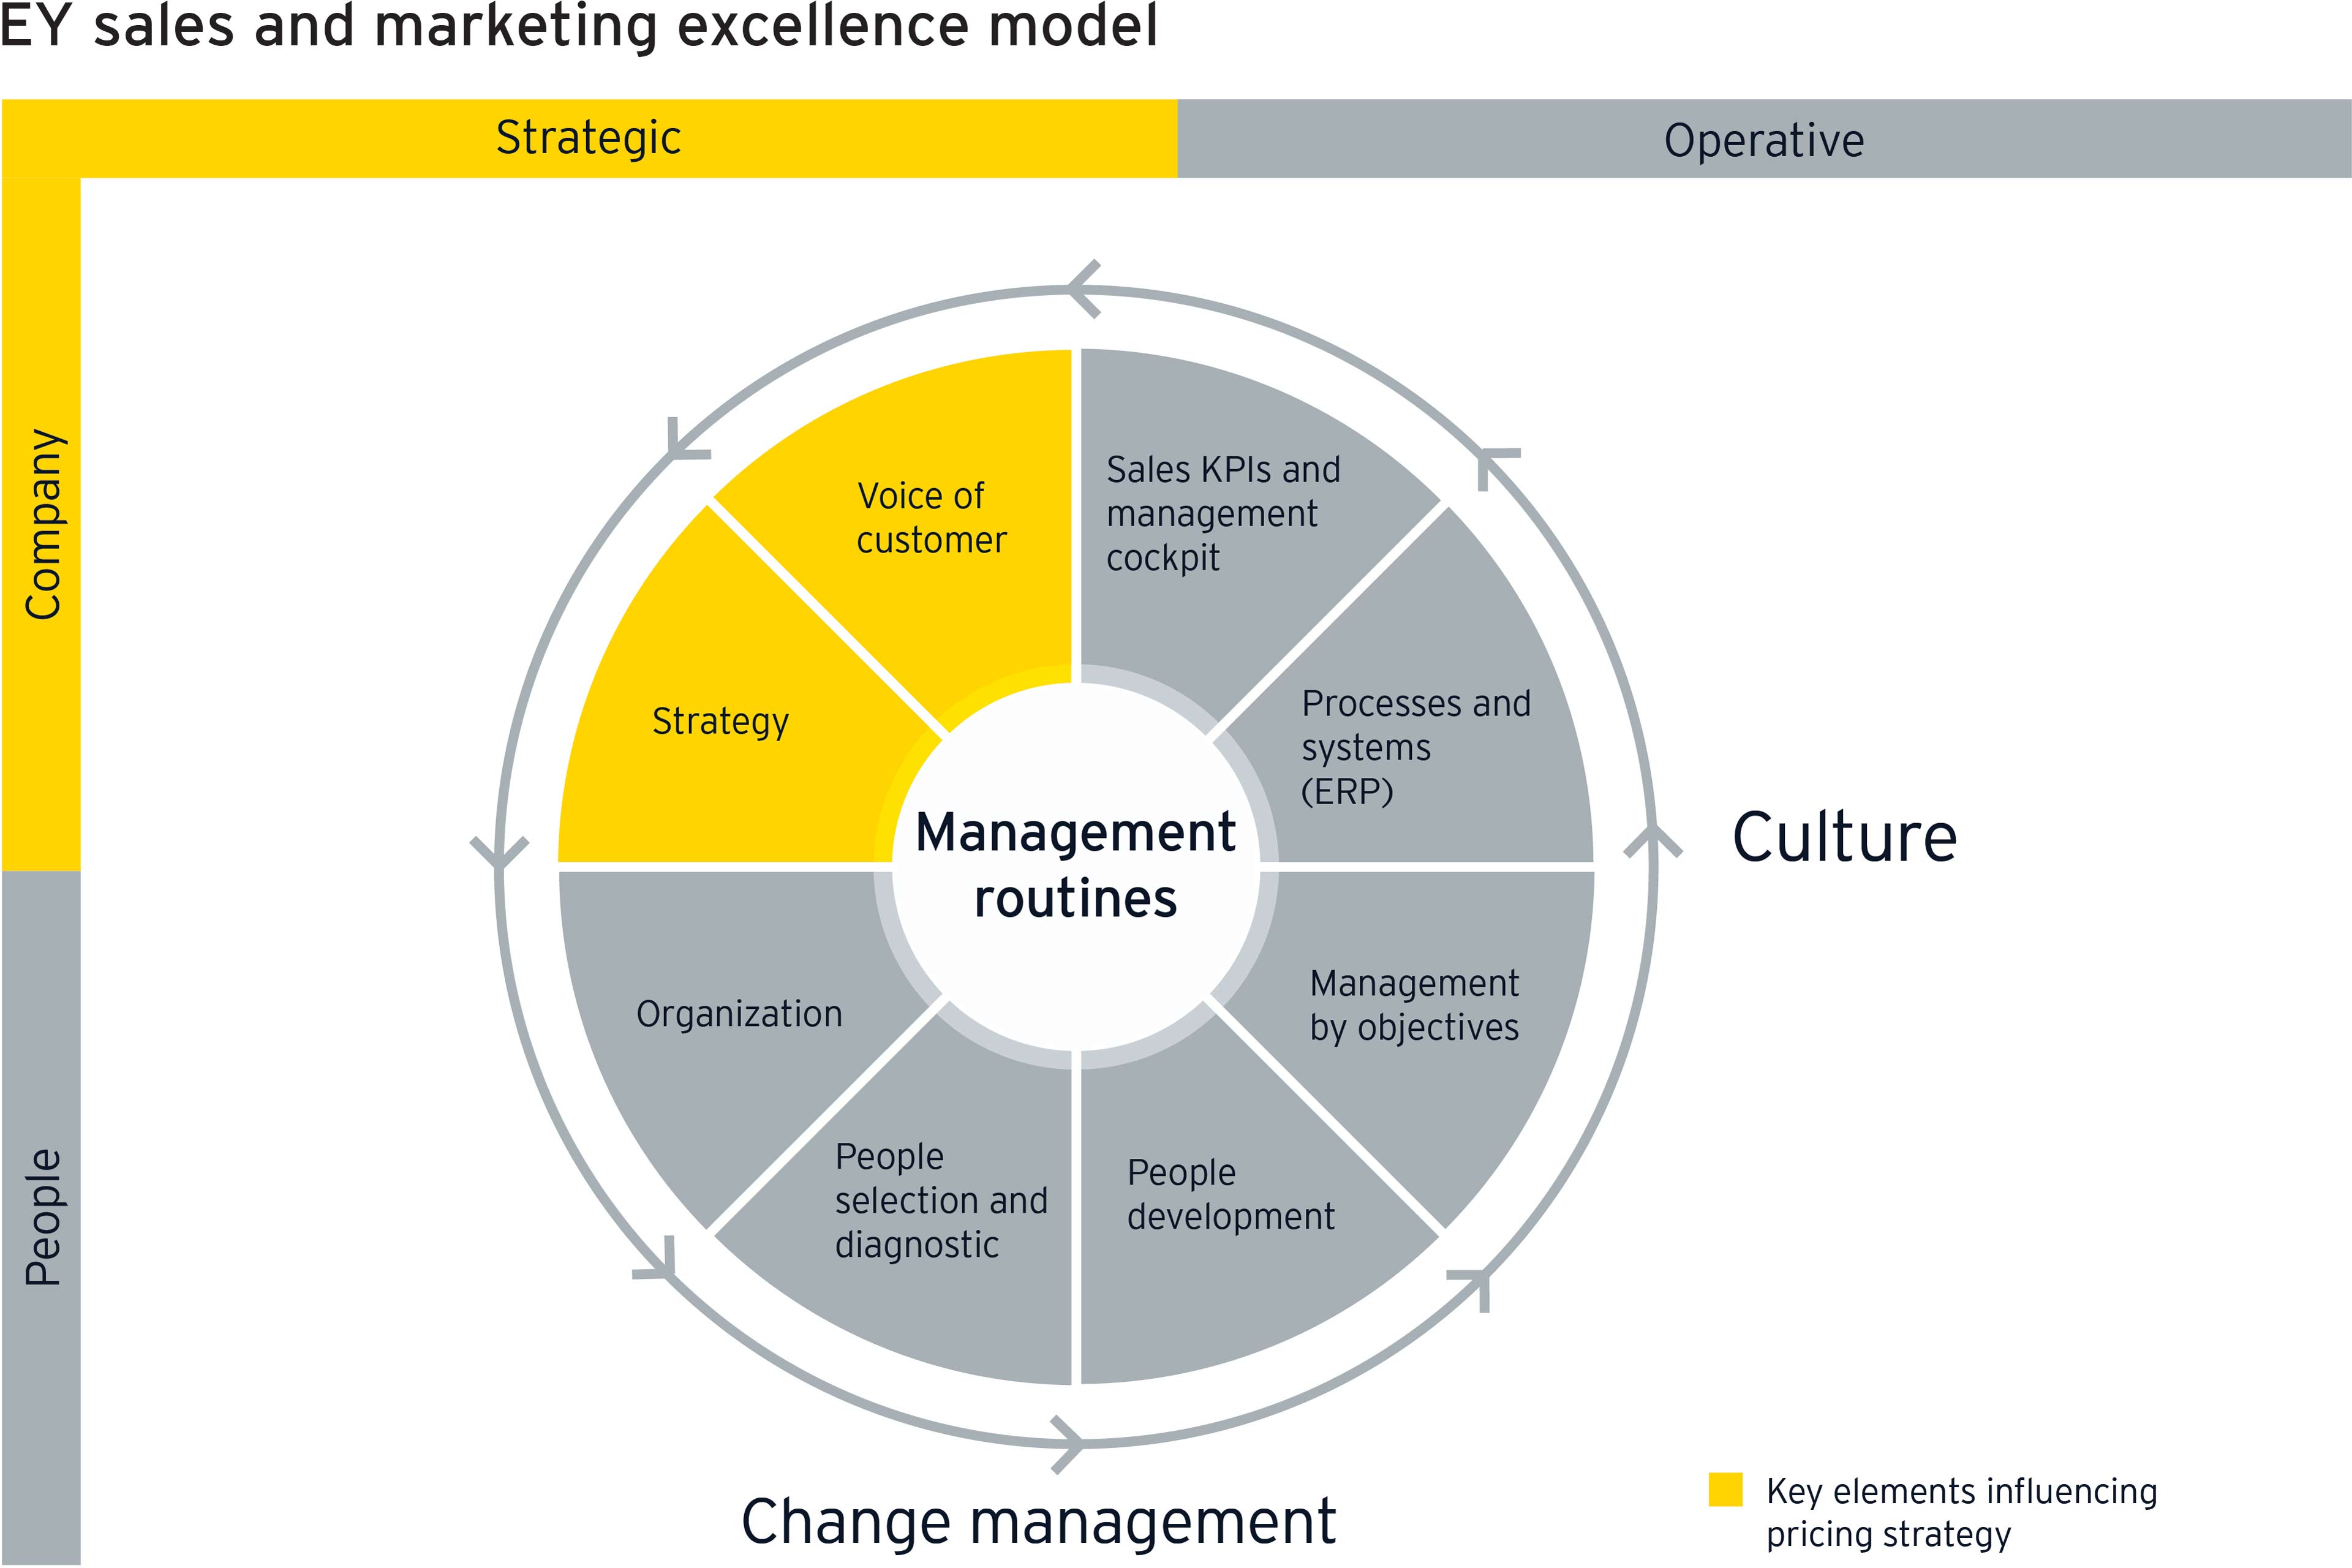 EY sales and marketing excellence model